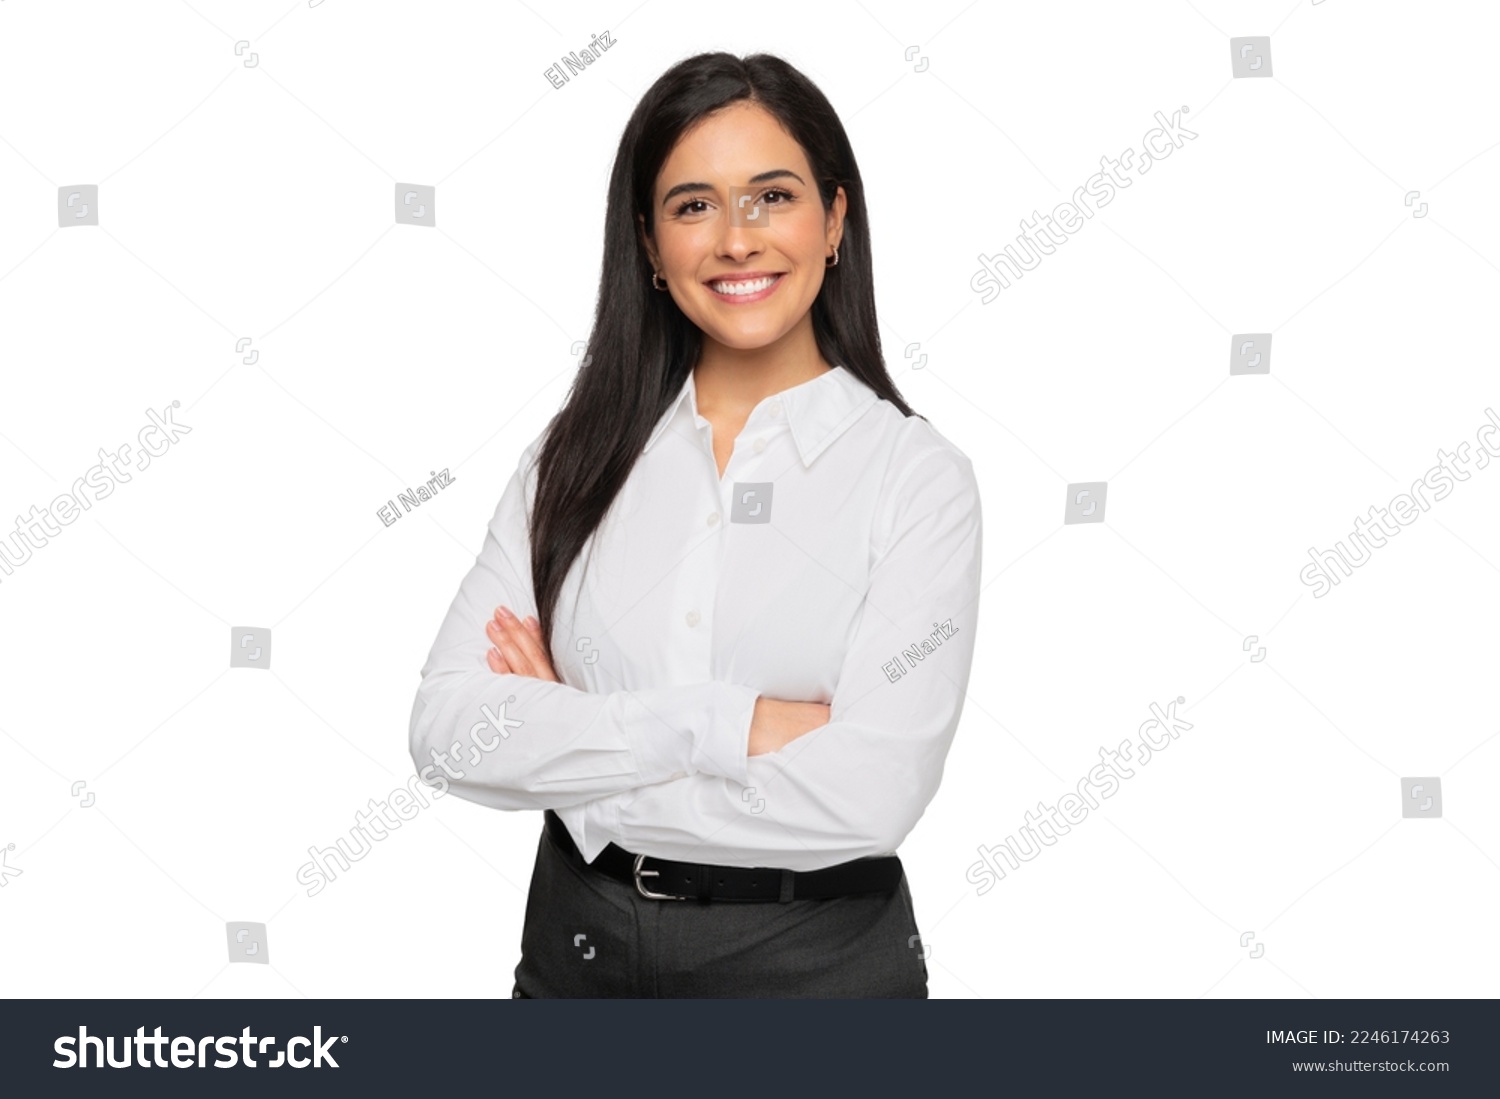 Cheerful brunette business woman student in white button up shirt, smiling confident and cheerful with arms folded, isolated on a white background #2246174263